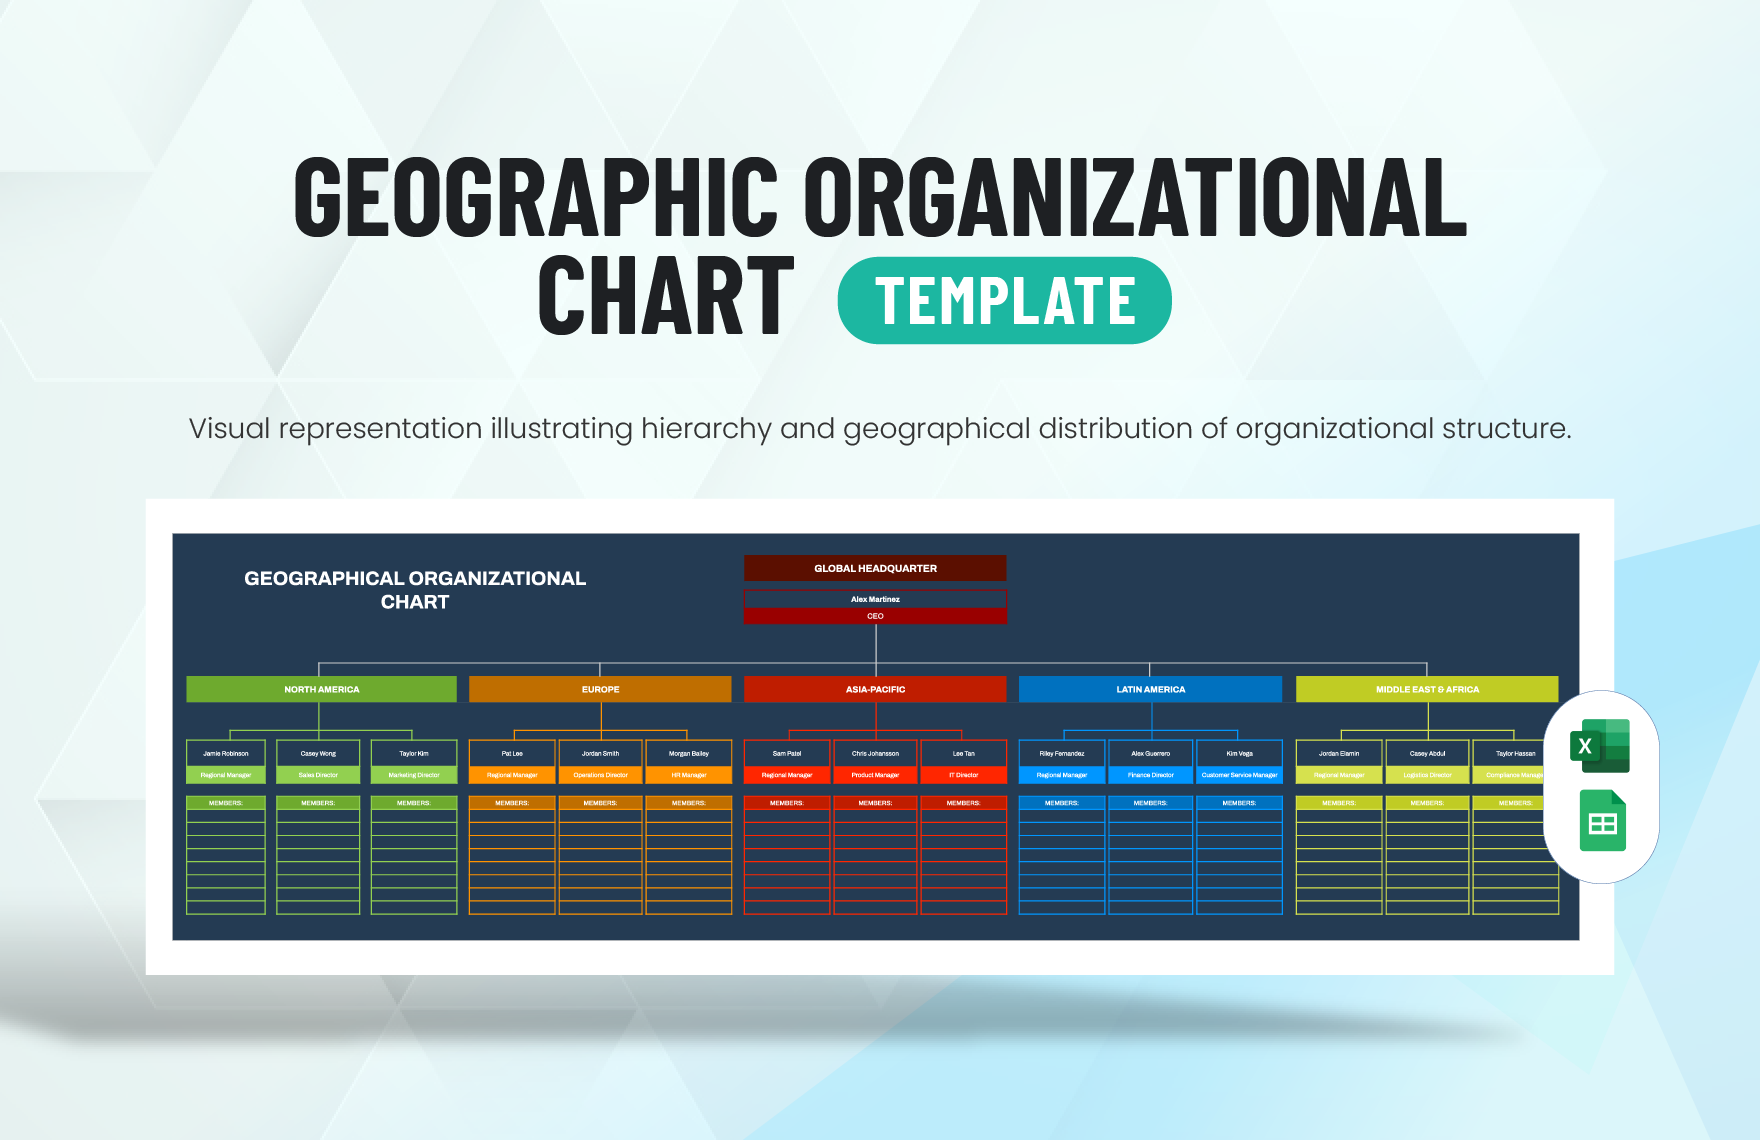 Geographic Organizational Chart Template in Excel, Google Sheets